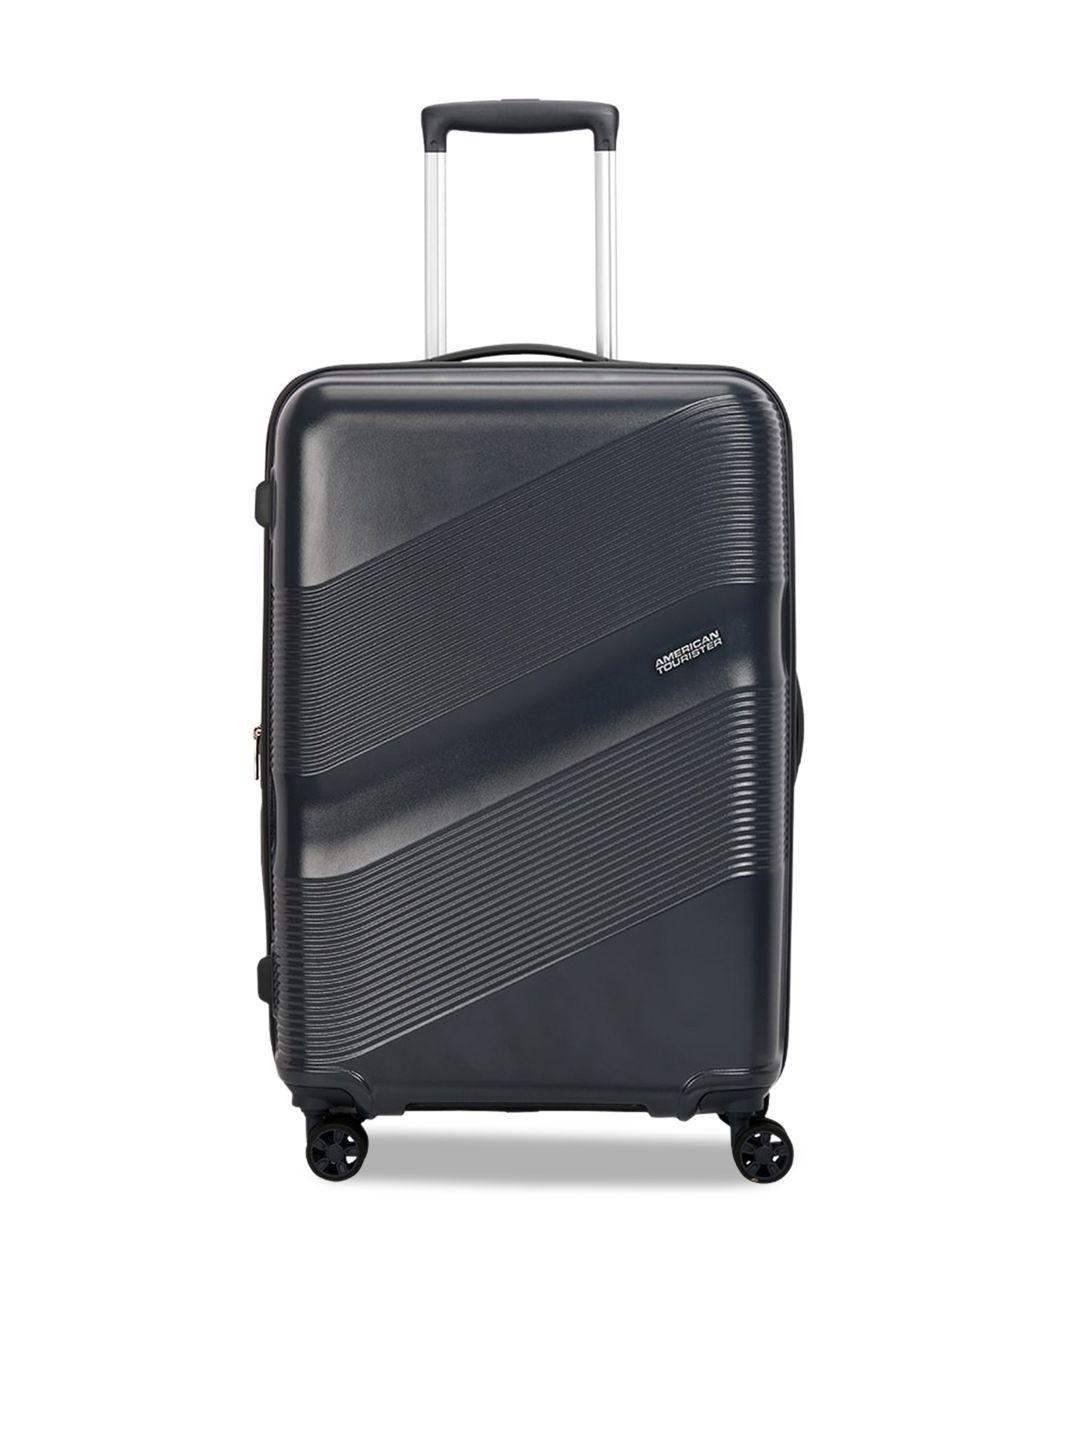 american tourister grey textured hard-sided trolley bag- 69 cm